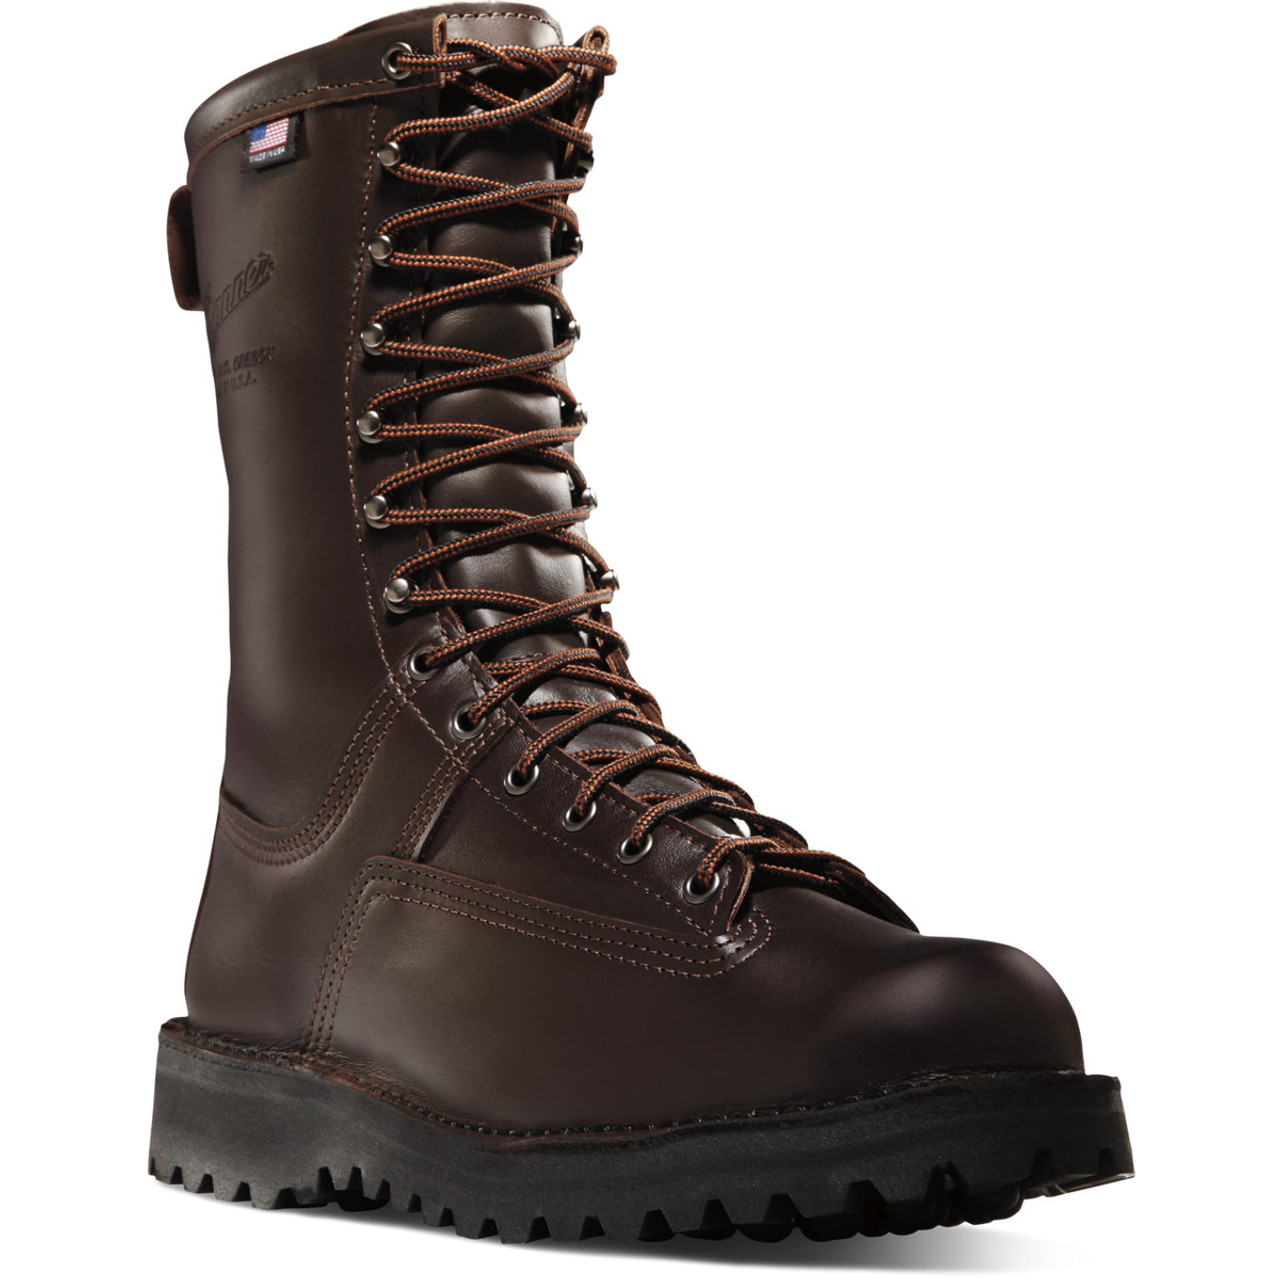 DANNER® CANADIAN 10" BROWN INSULATED 600G HUNT BOOTS 67200